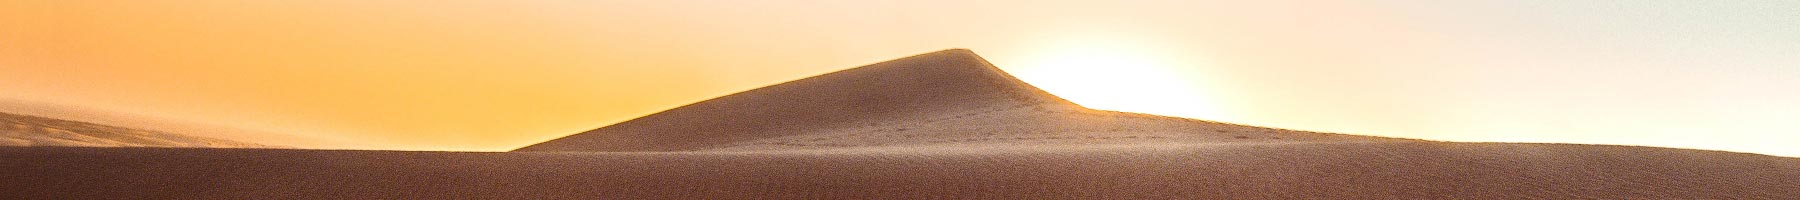 the sun rising over a sand dune